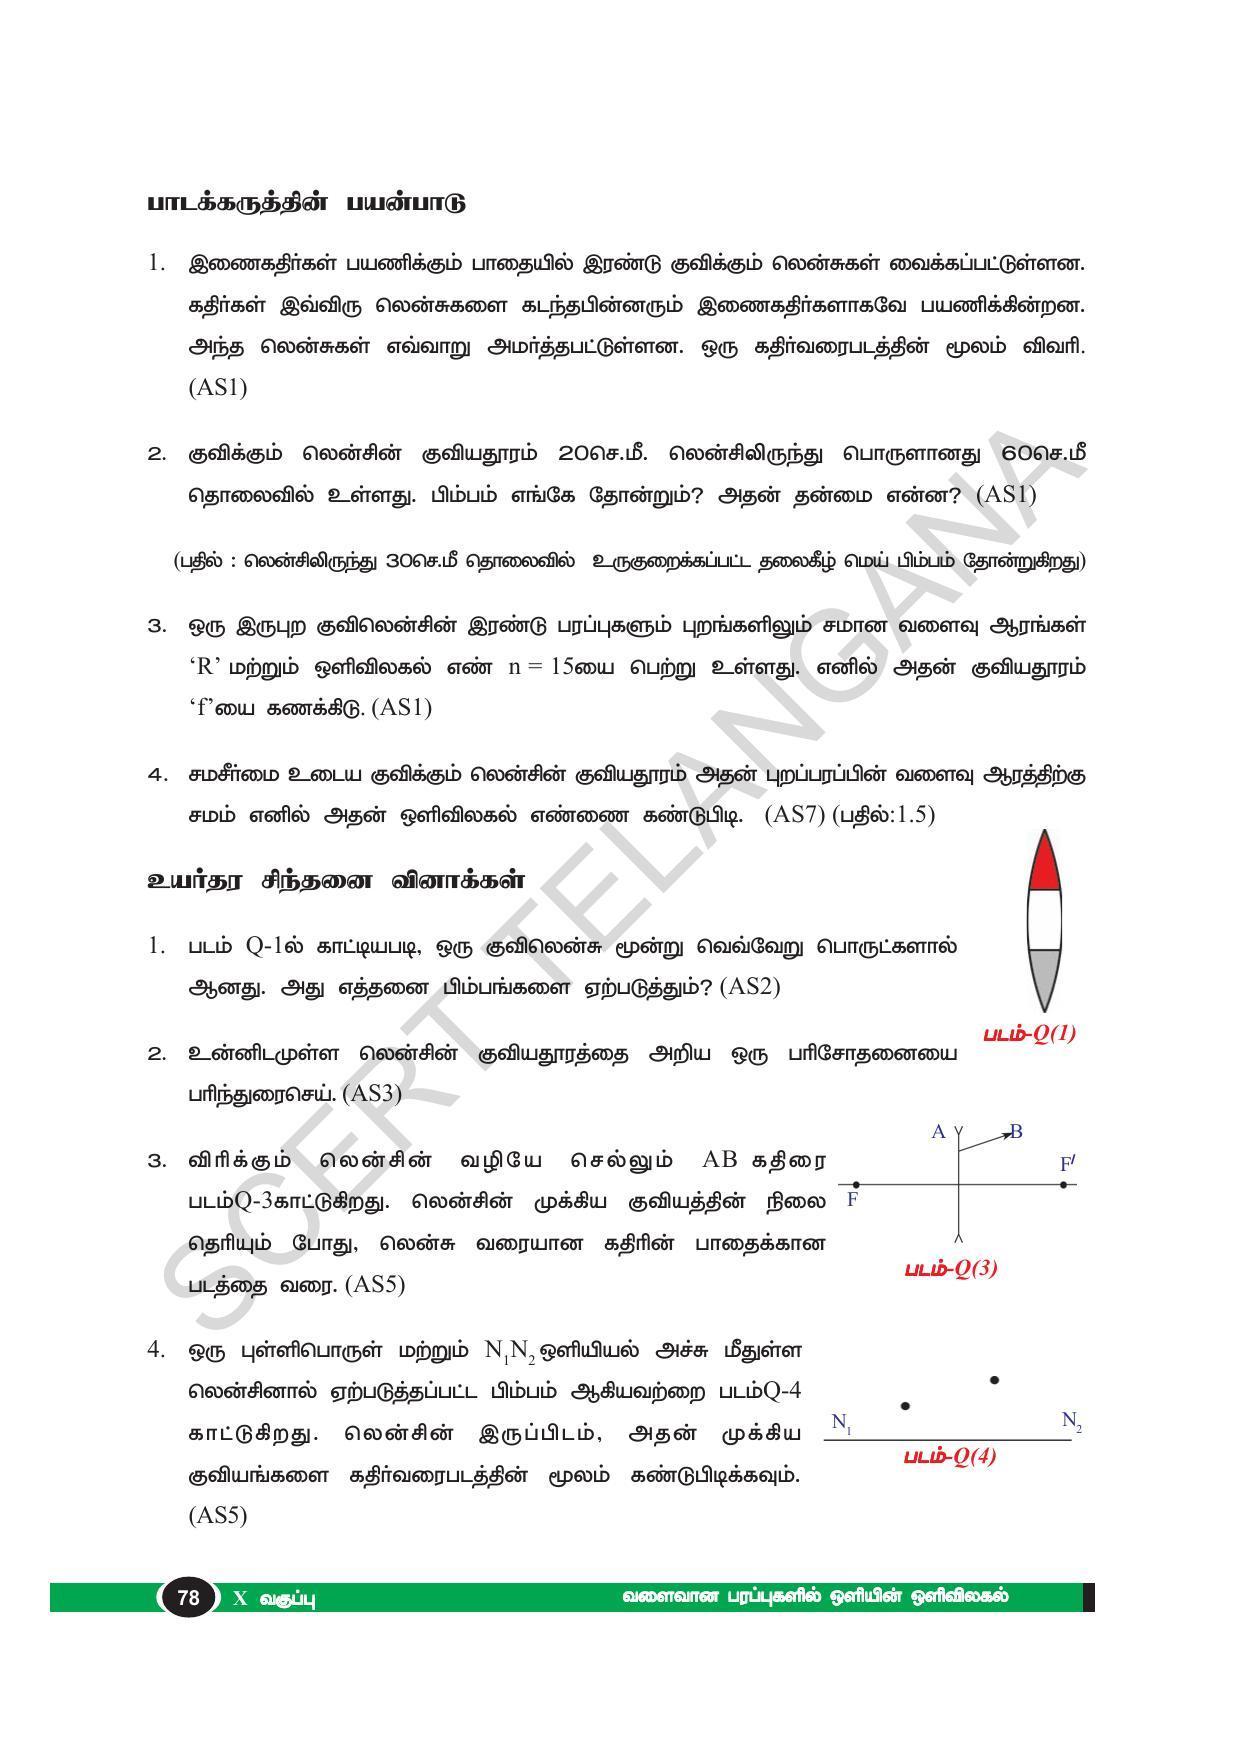 TS SCERT Class 10 Physical Science(Tamil Medium) Text Book - Page 90